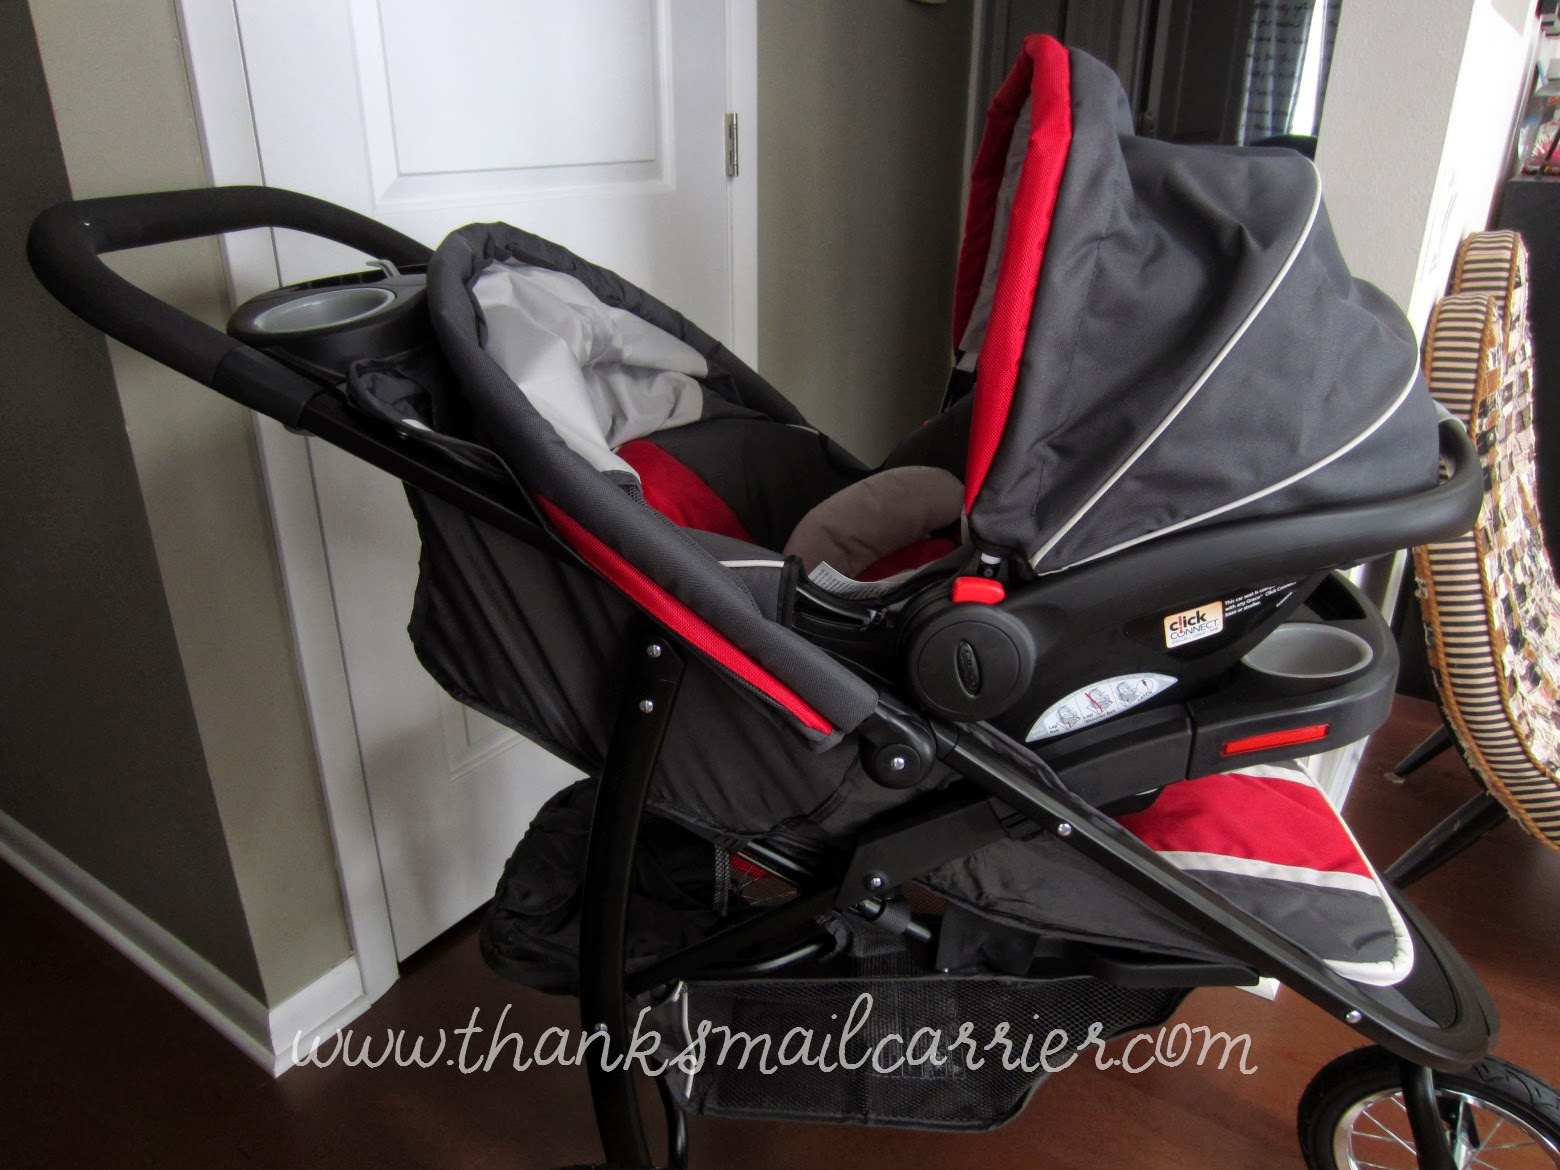 Graco Click Connect Travel System